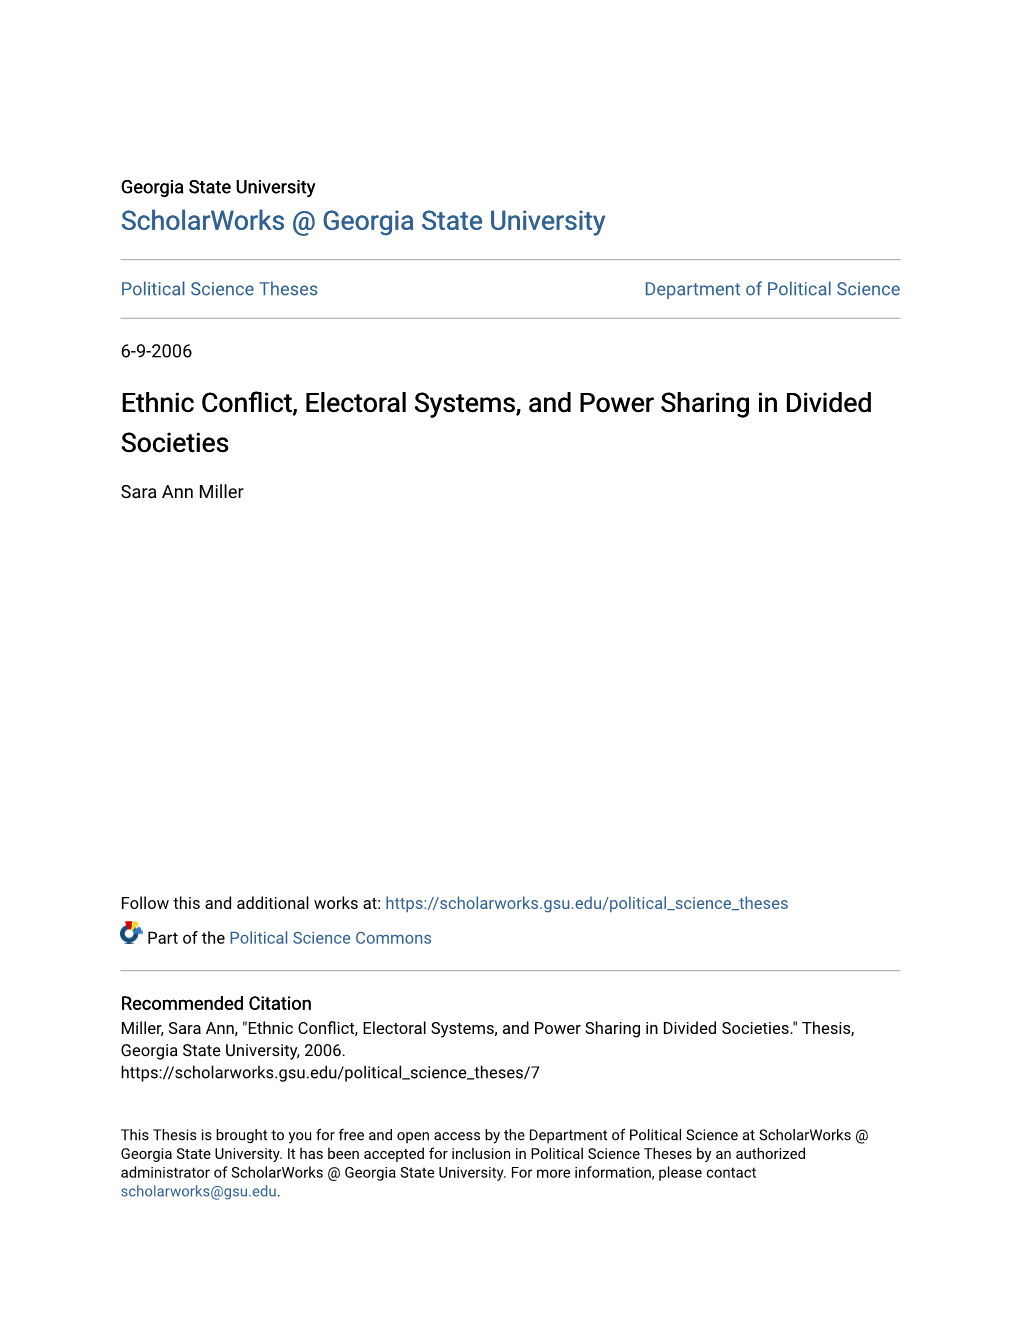 Ethnic Conflict, Electoral Systems, and Power Sharing in Divided Societies